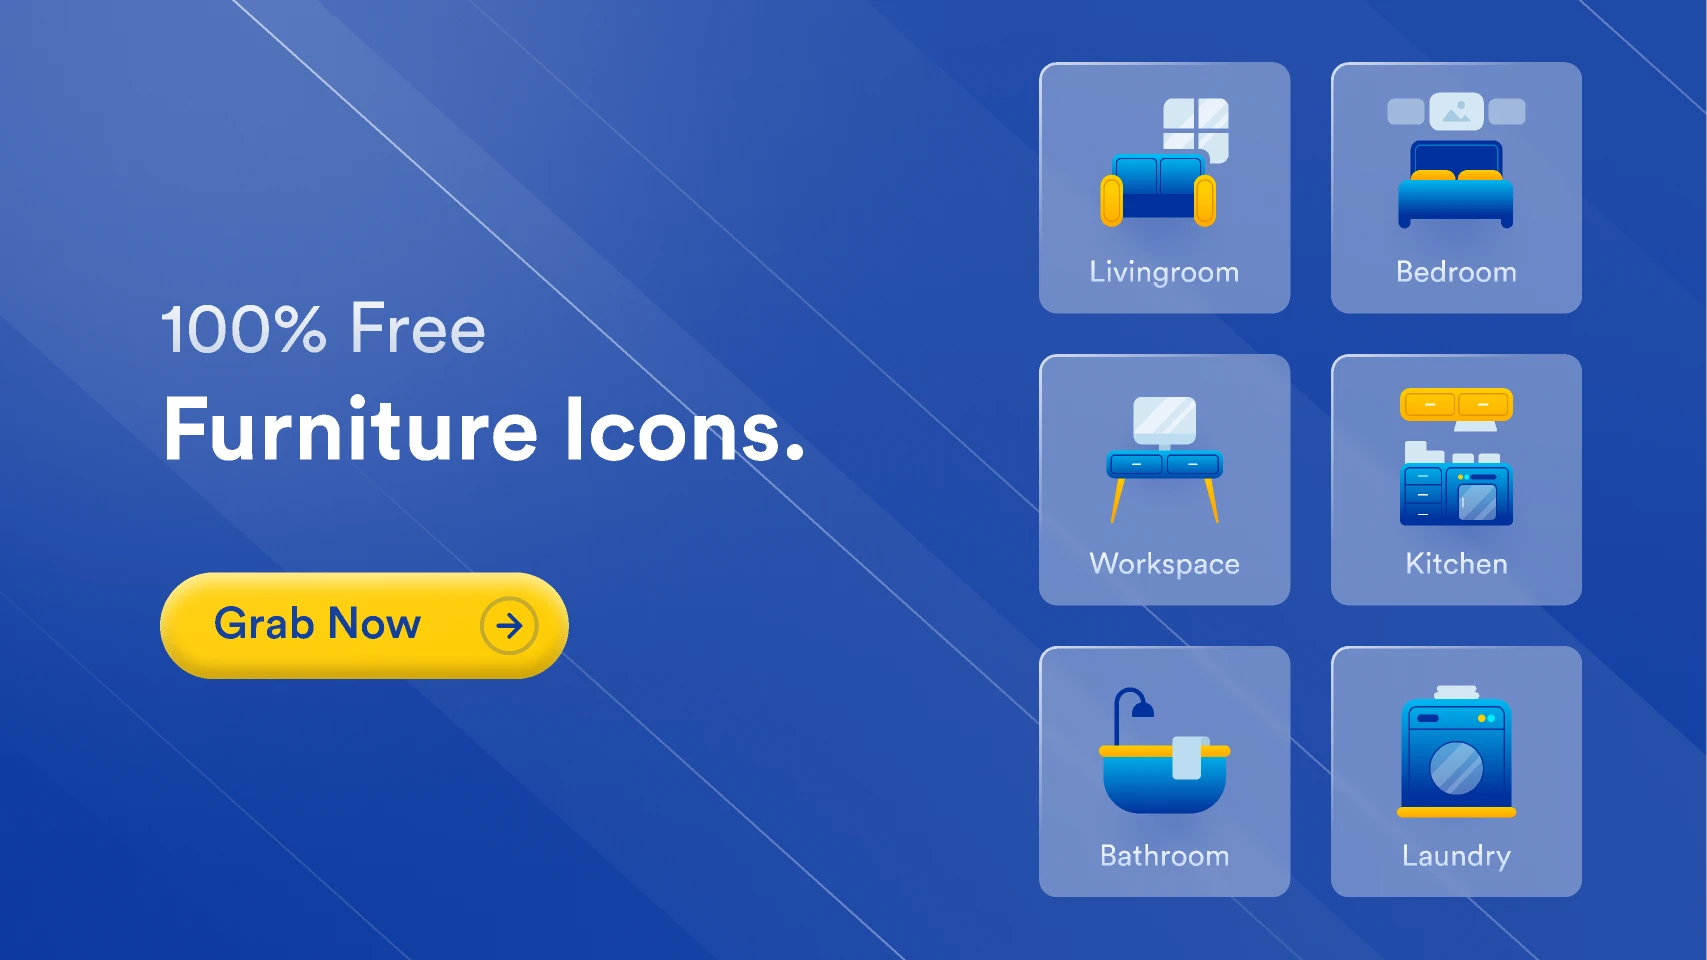 Furniture Icons - Freebies for Figma and Adobe XD